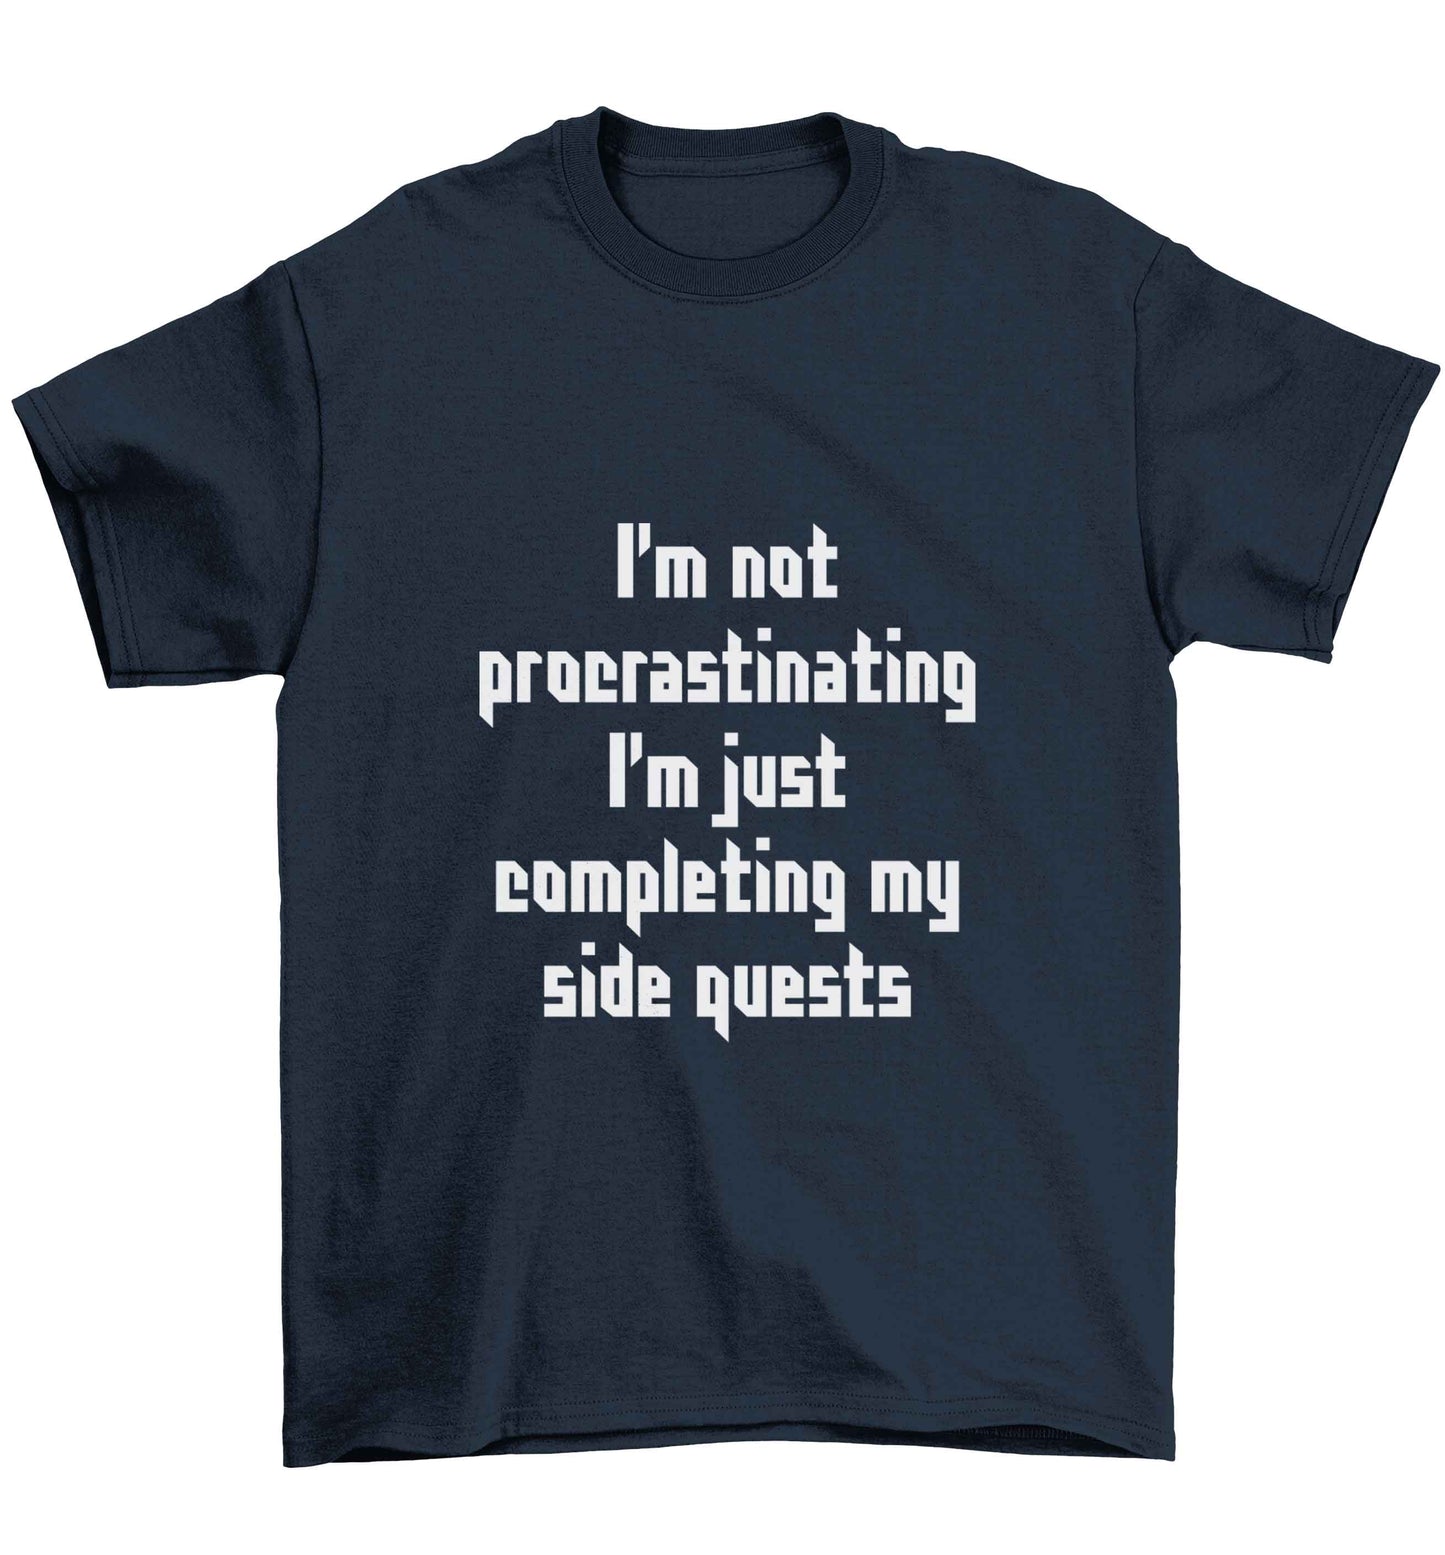 I'm not procrastinating I'm just completing my side quests Children's navy Tshirt 12-13 Years